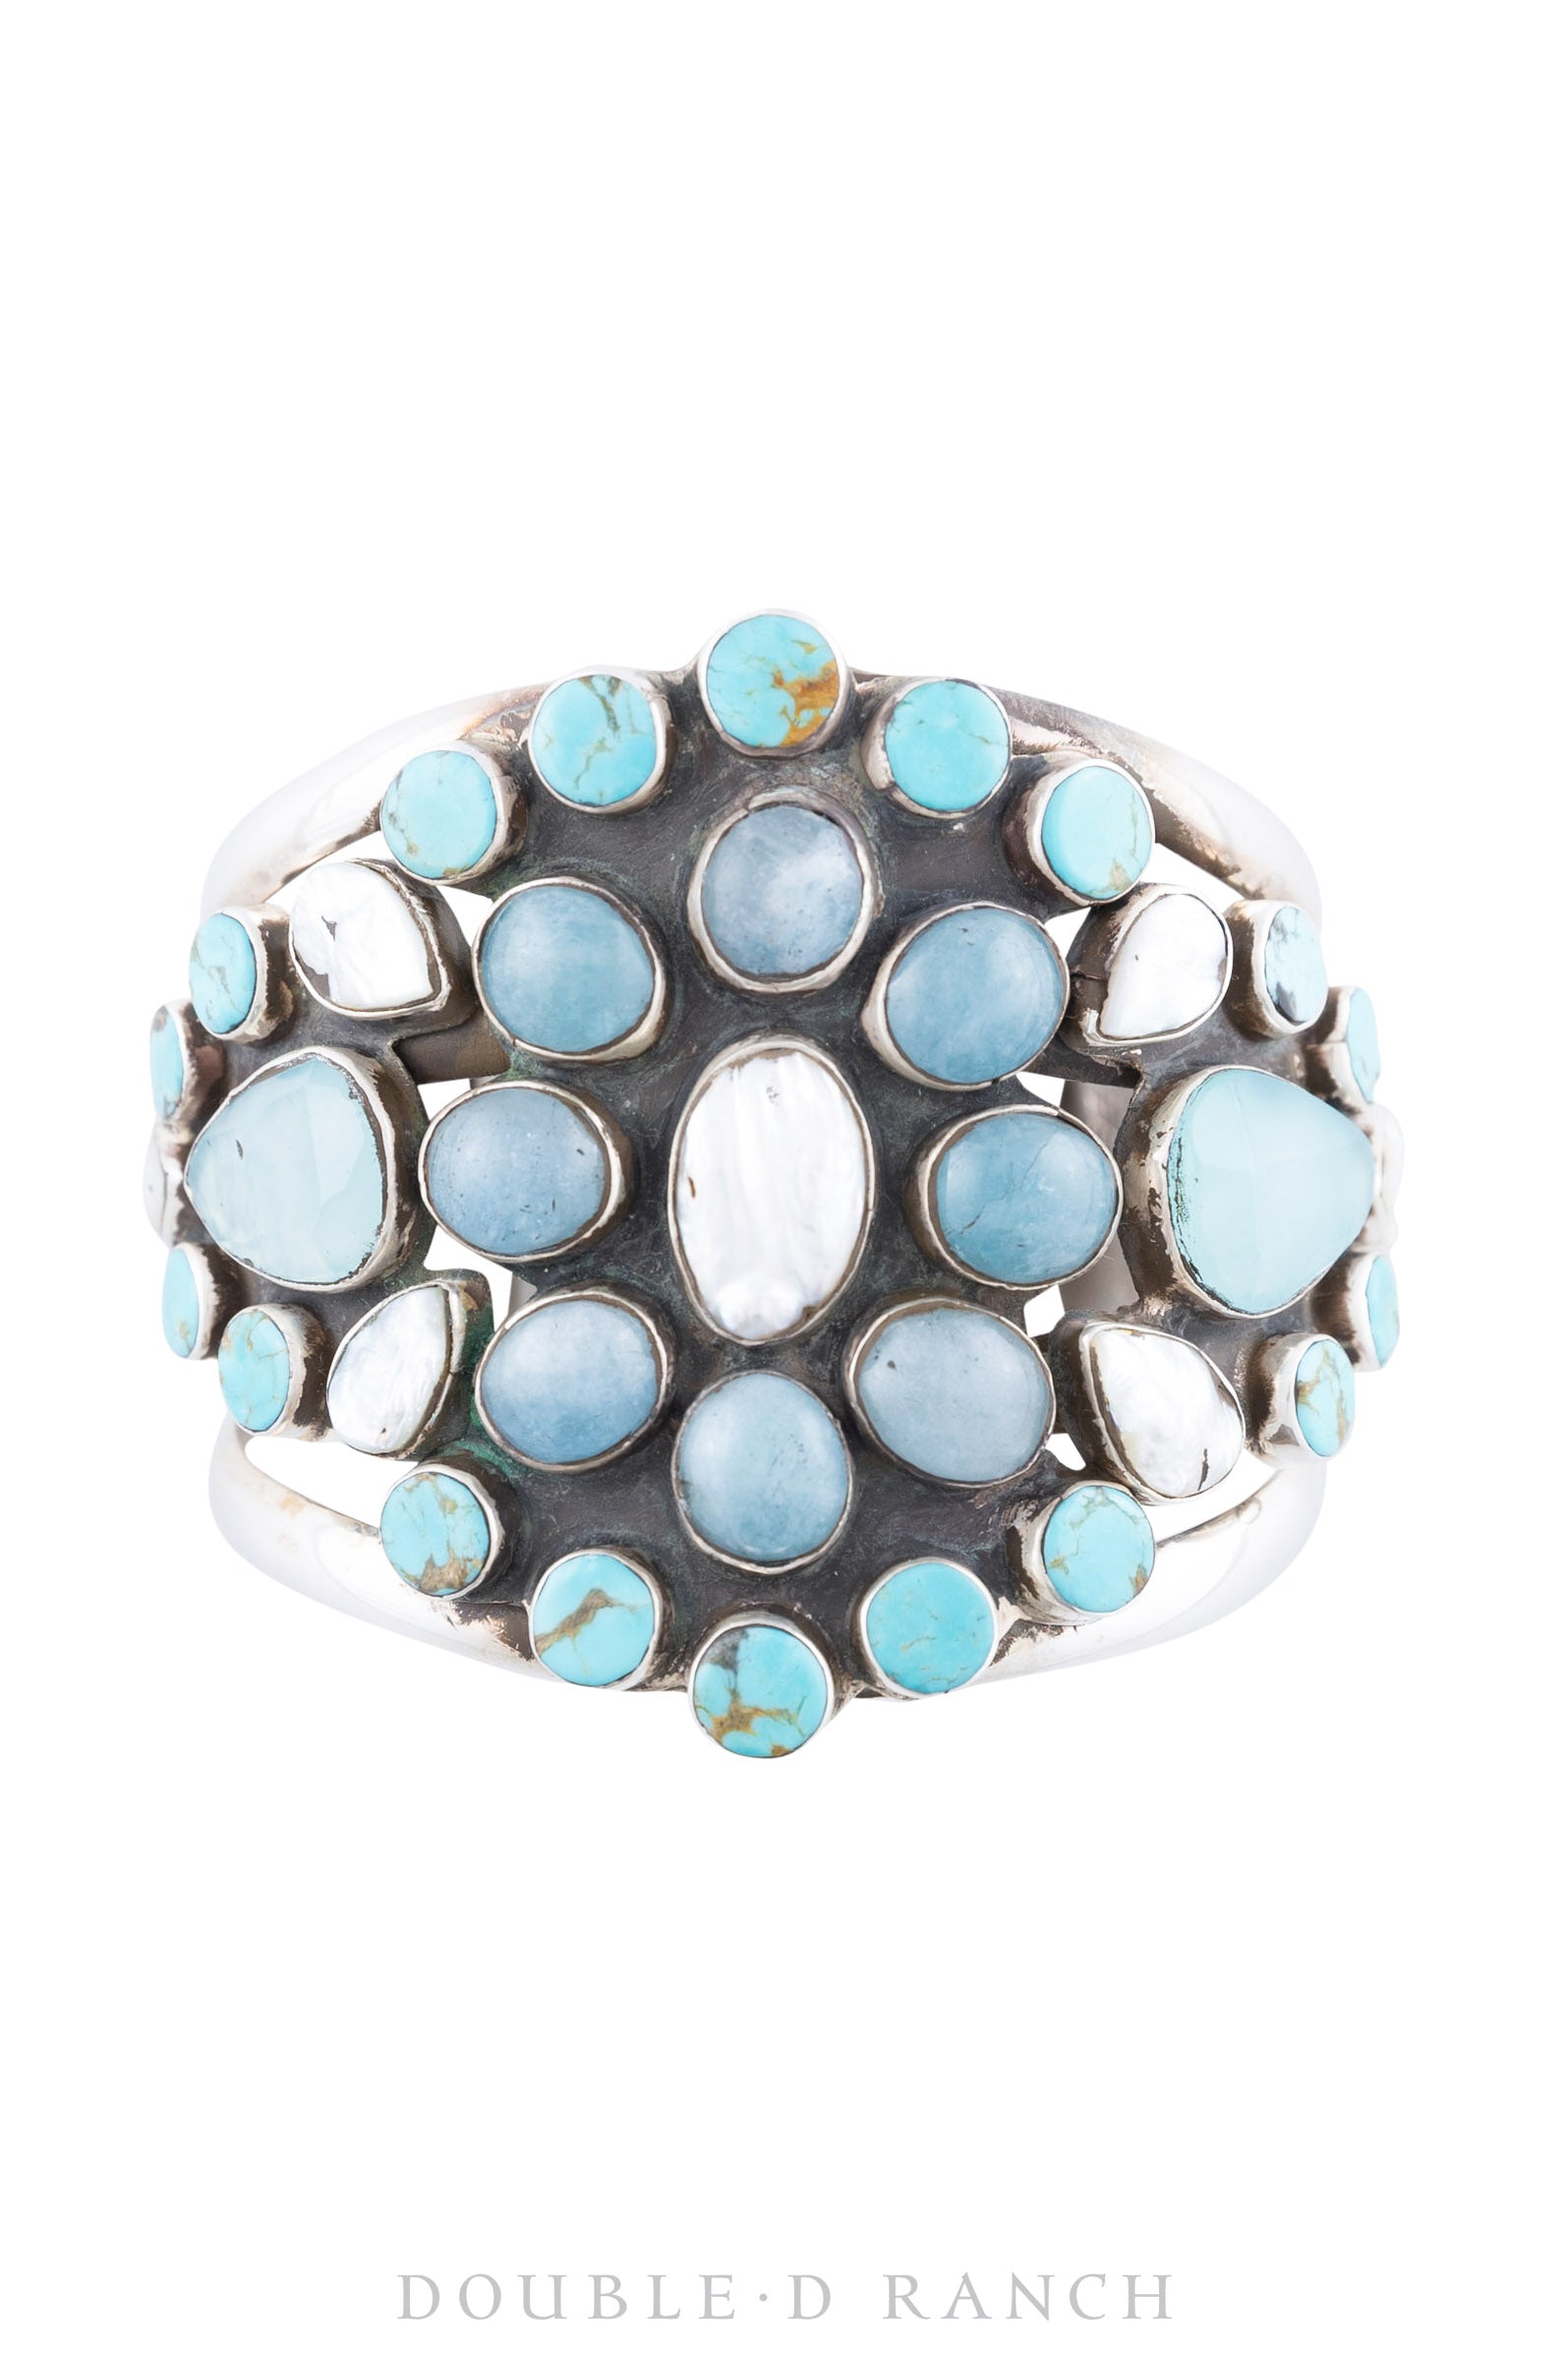 Cuff, Cluster, Blue Chalcedony, Aquamarine, Turquoise, & Mother of Pearl, Hallmark, #2, 3160